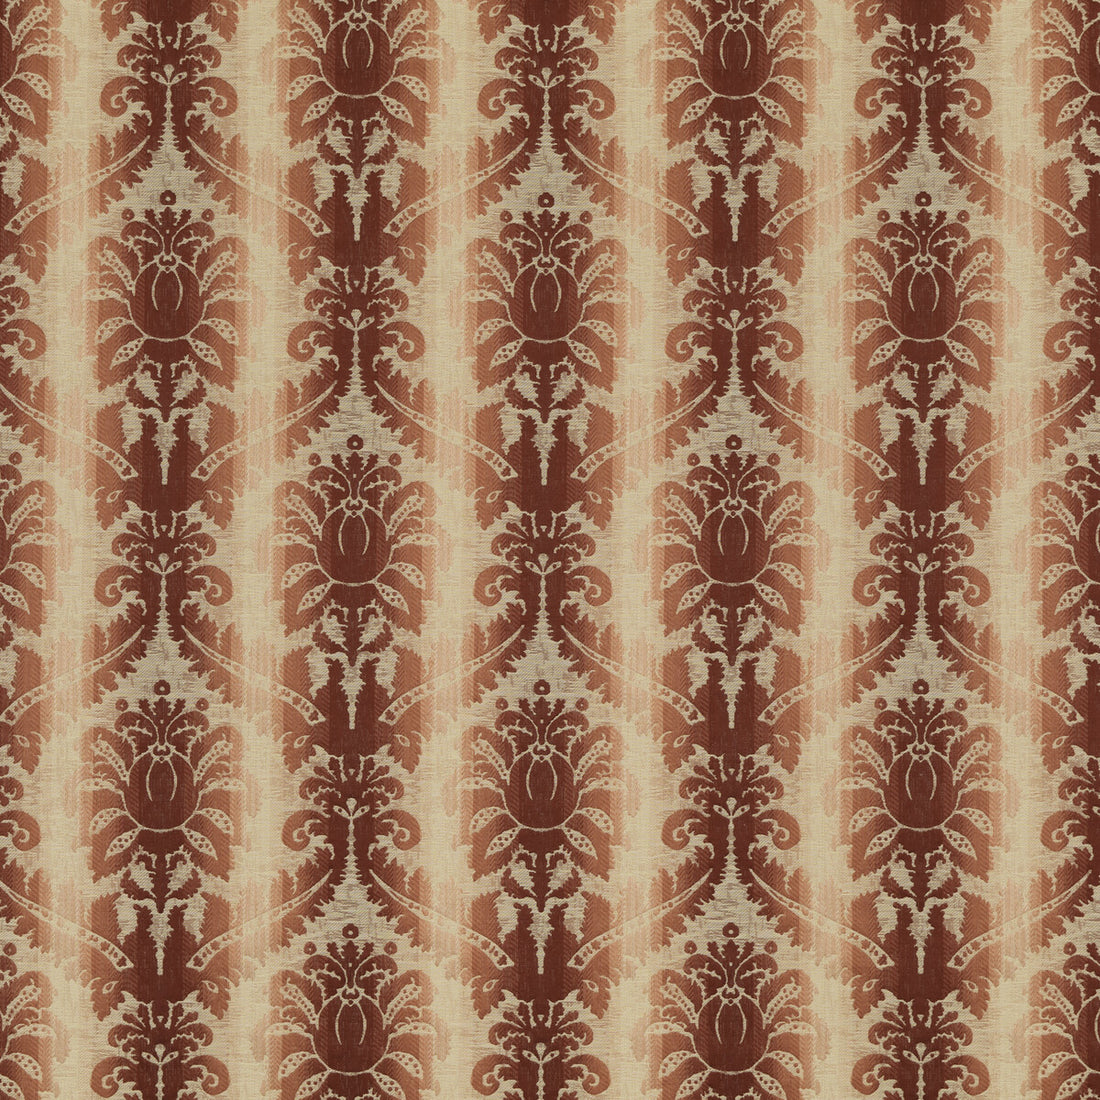 Poivre Damask fabric in red color - pattern 8018106.19.0 - by Brunschwig &amp; Fils in the Cevennes collection